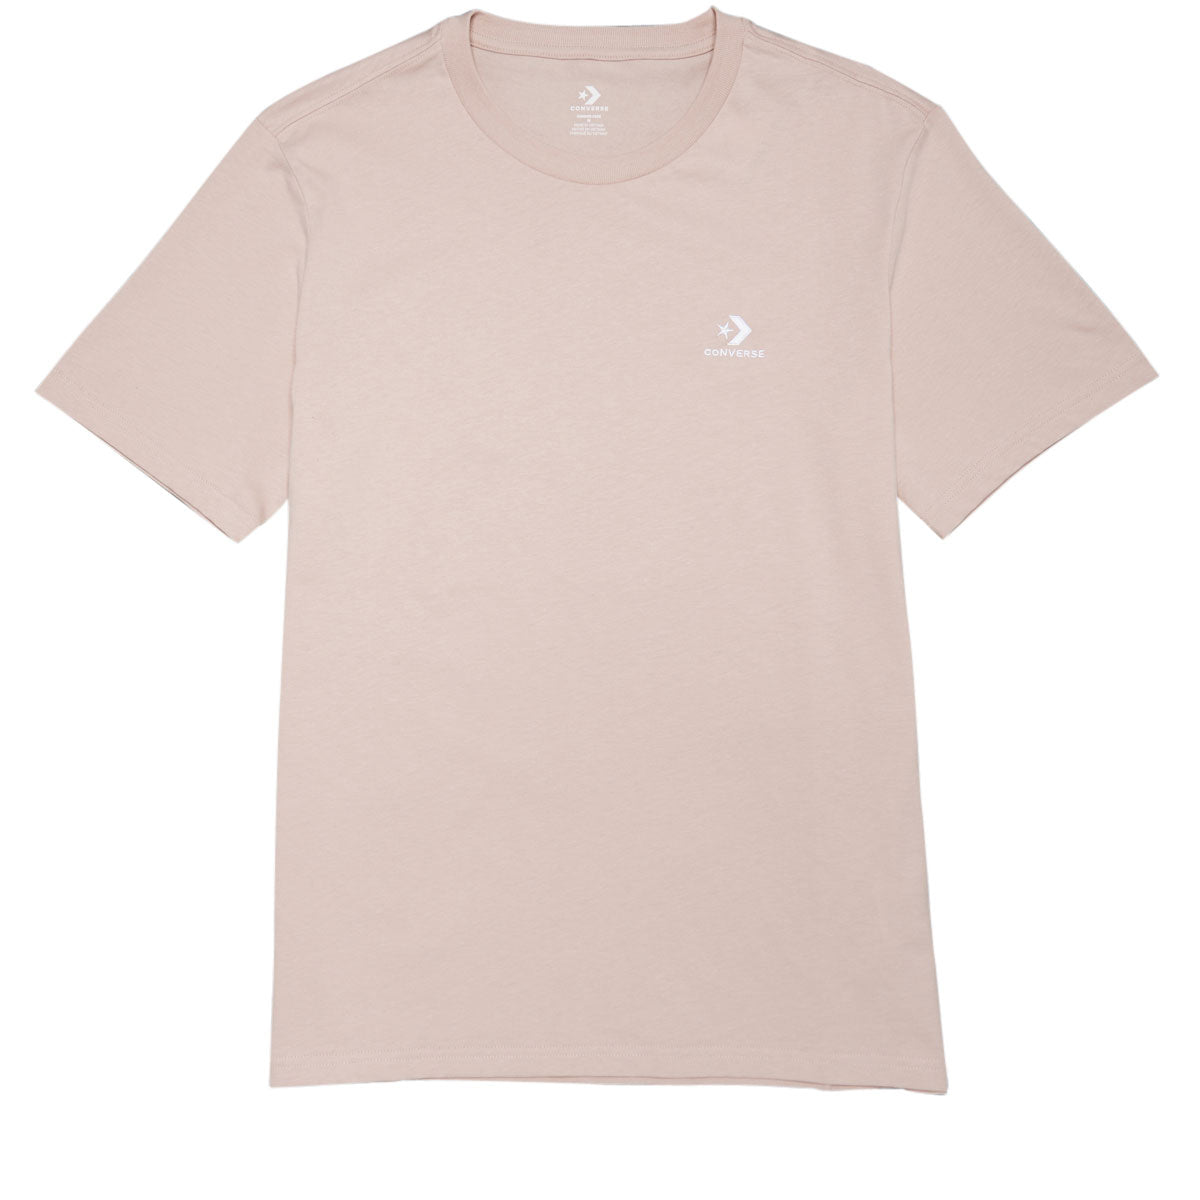 Converse Go-to Embroidered Star Chevron T-Shirt - Pink Sage image 1